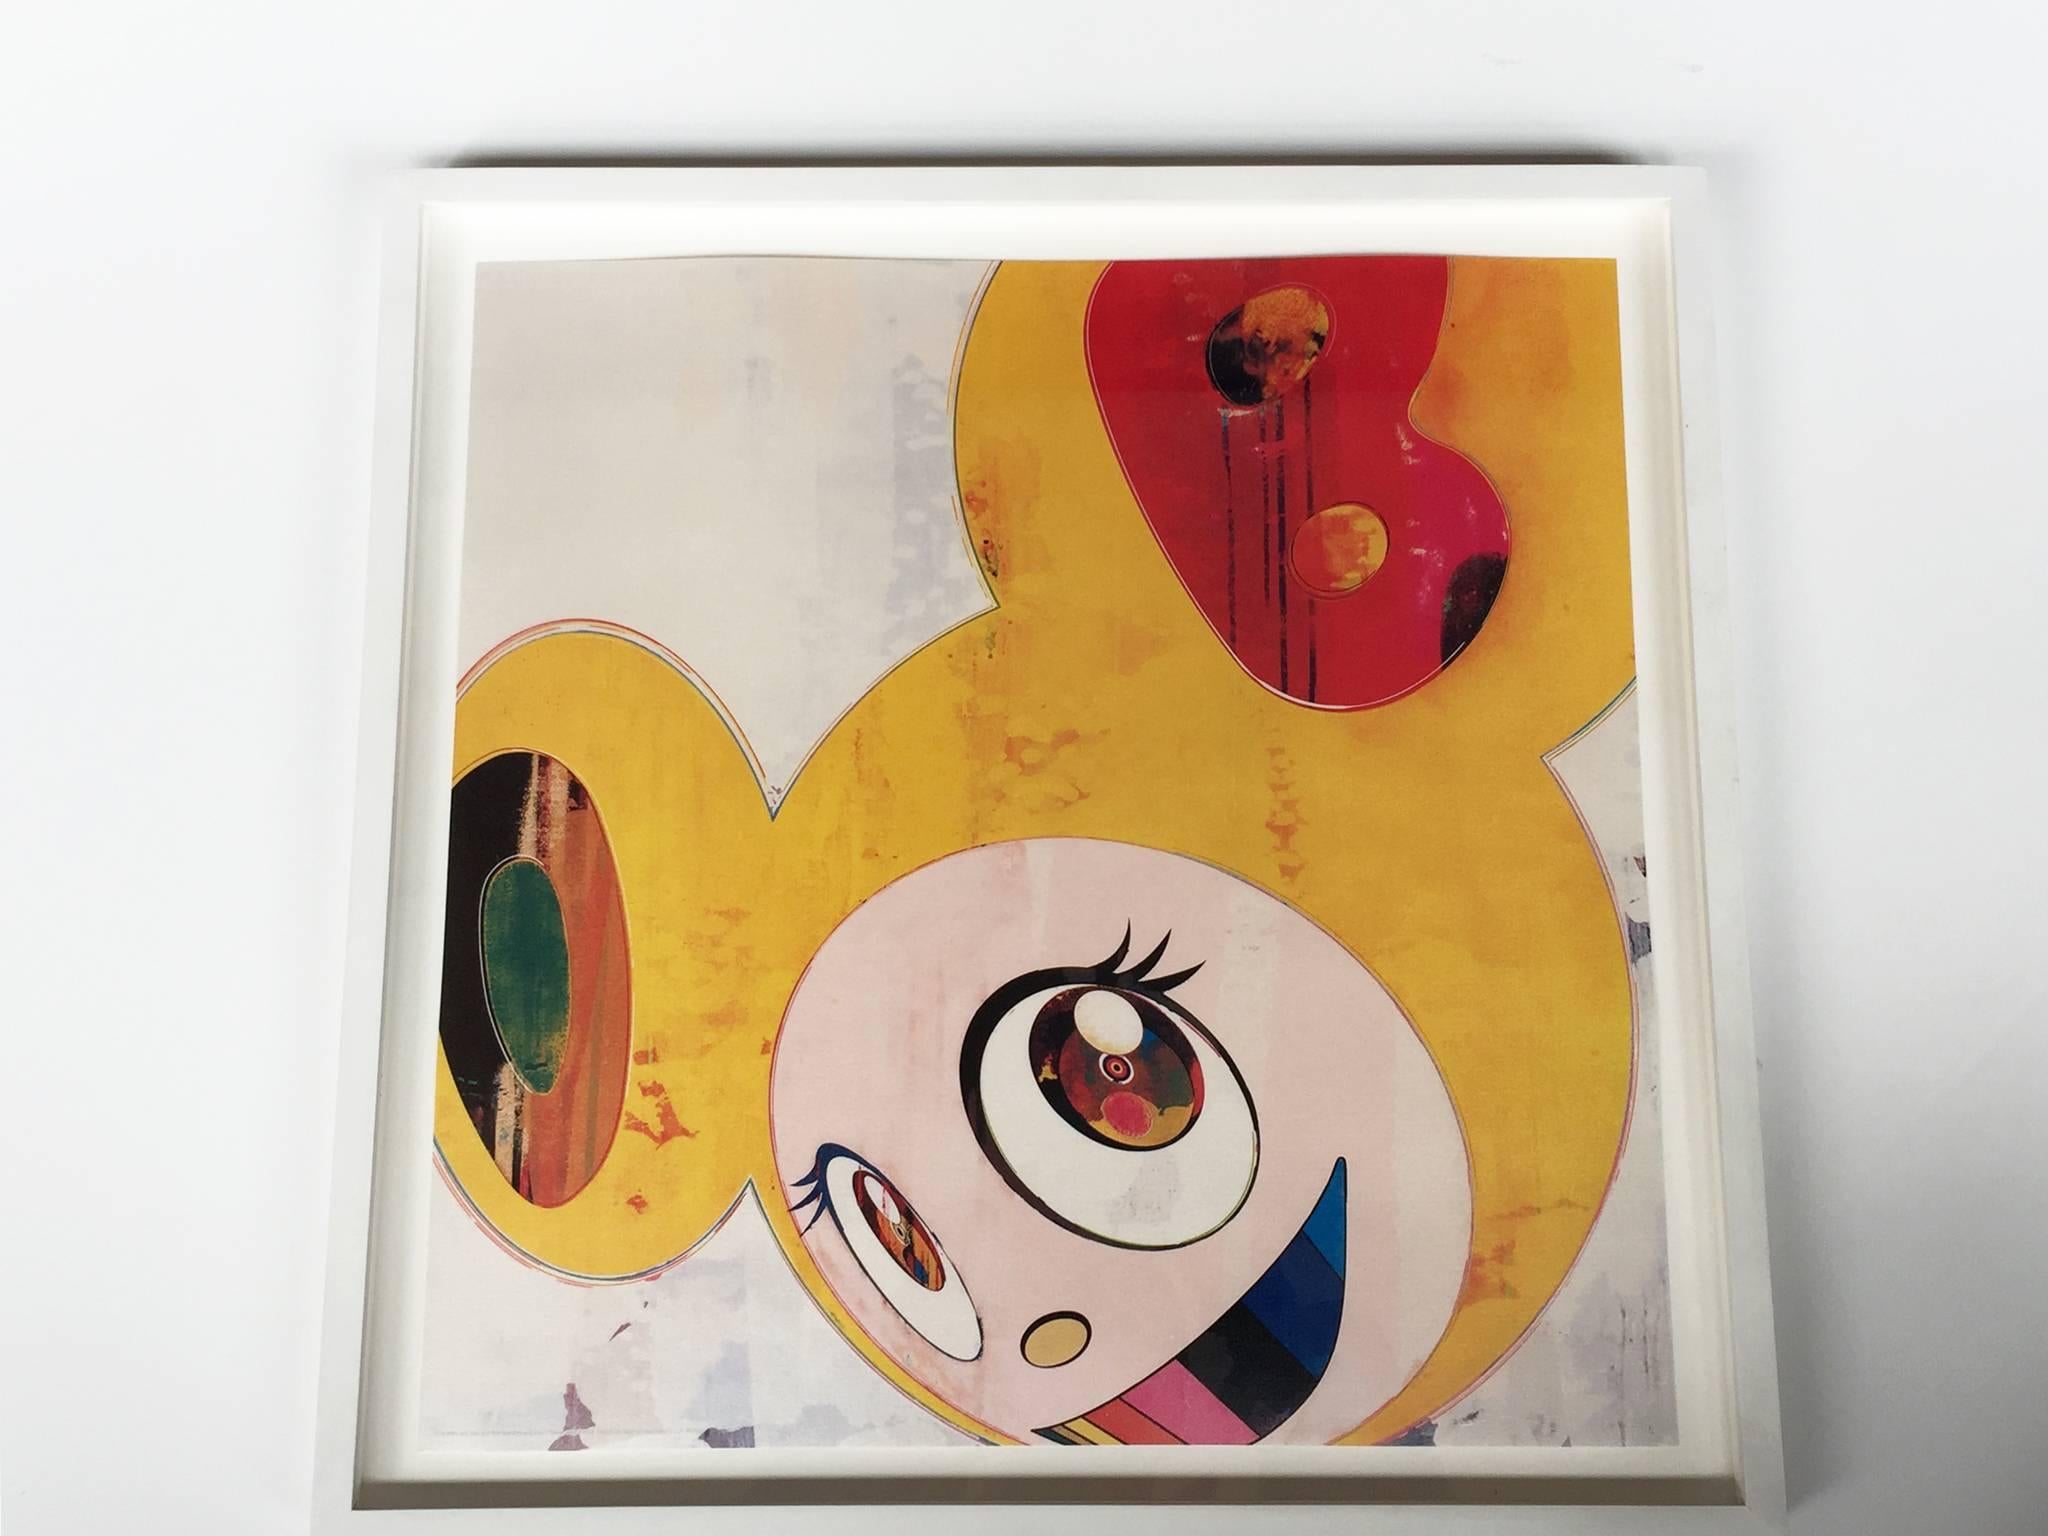 This lithograph is by the artist Takashi Murakami, whose work playfully brings to light the connections between manga and anime and traditional Japanese art, such as the well-published ukiyo-e woodblock prints of the 17th through 19th century. This